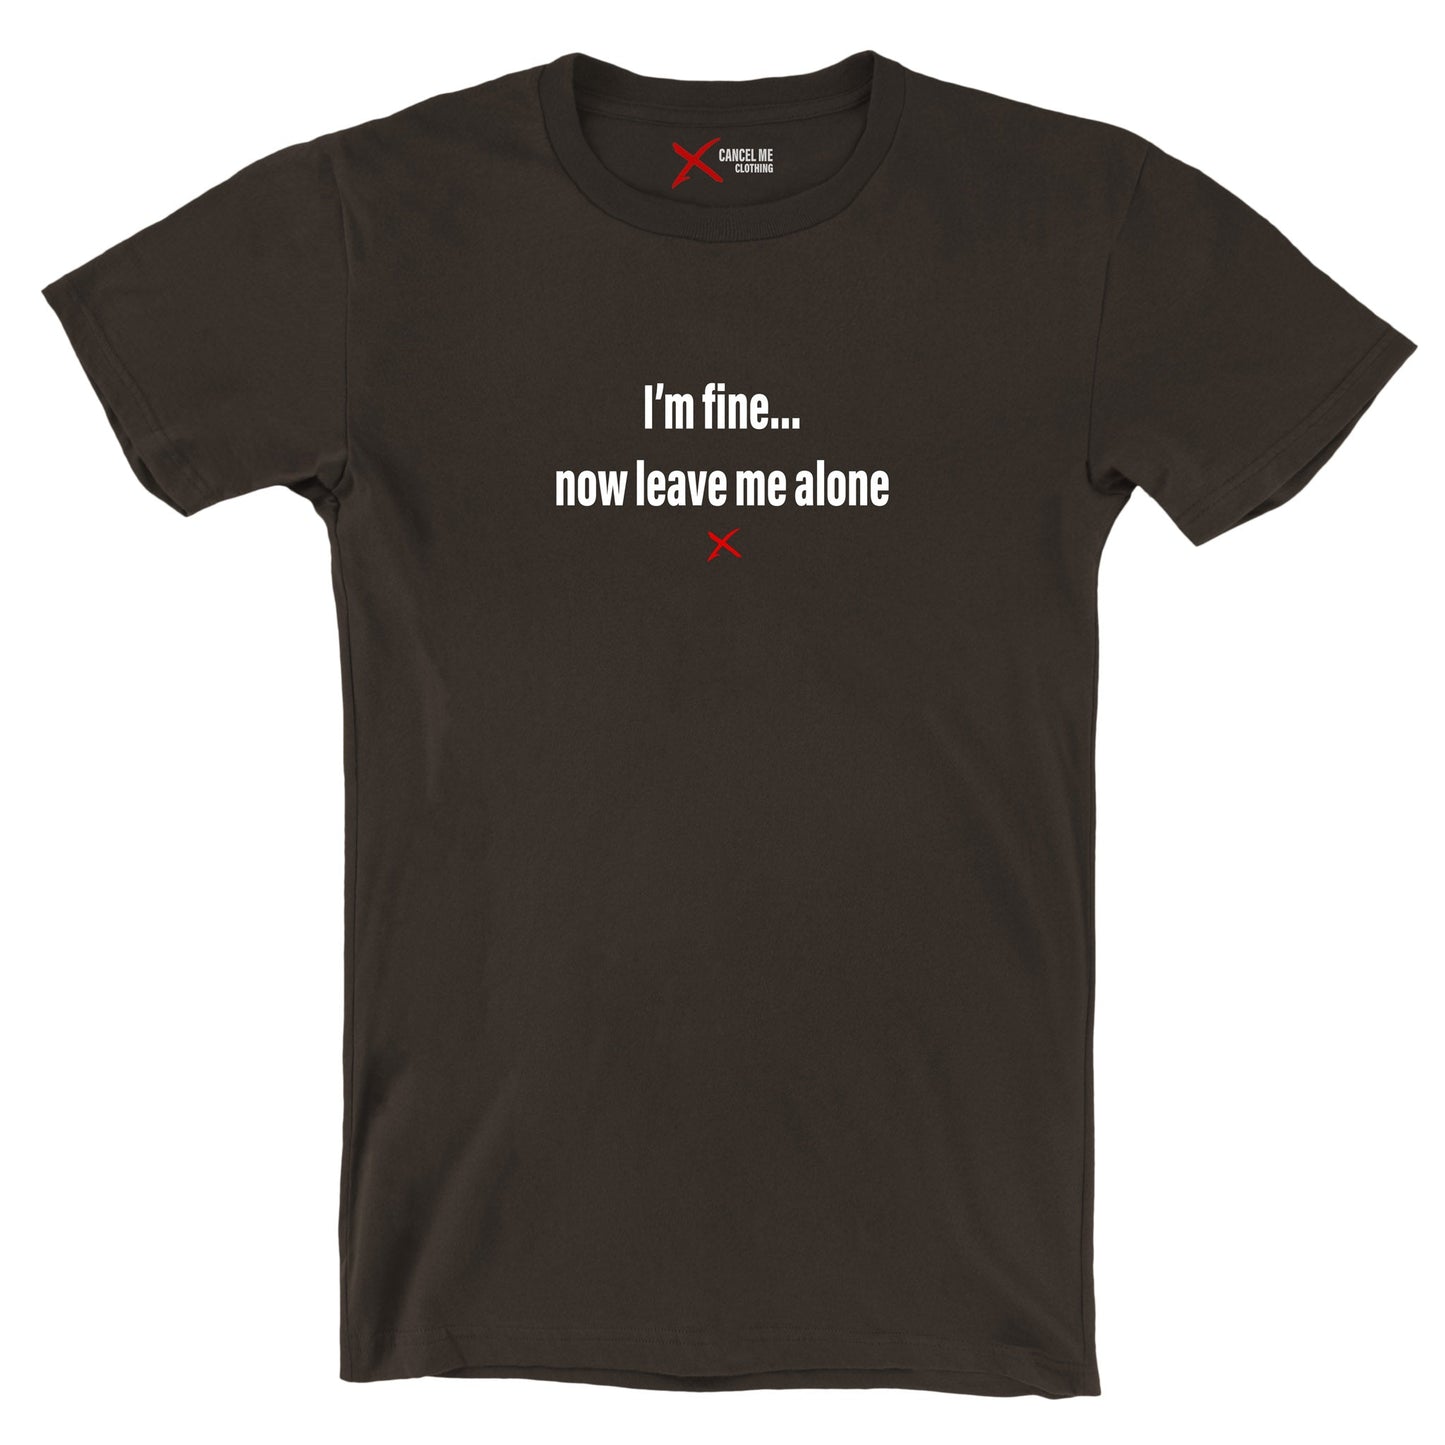 I'm fine... now leave me alone - Shirt